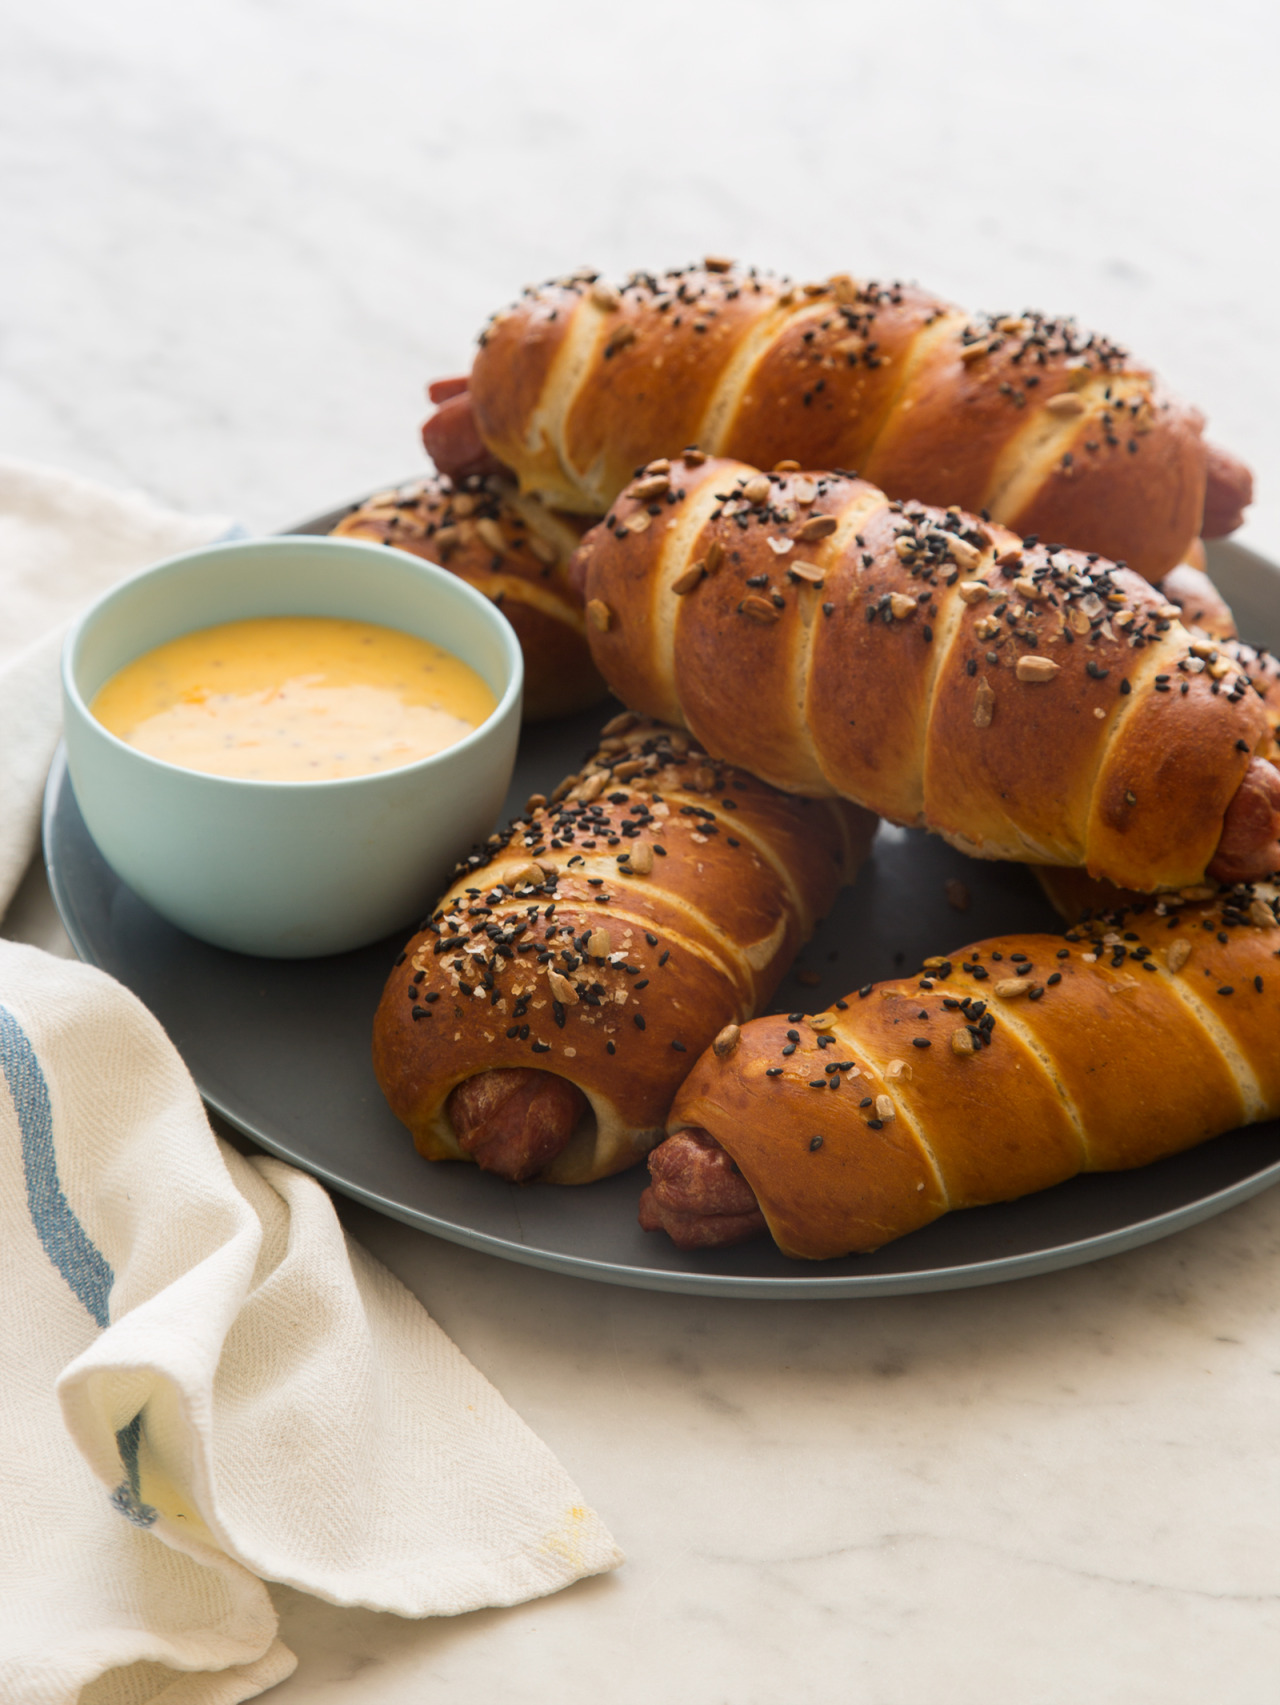 Pretzel Dogs with a Whole Grain Mustard Cheese Sauce